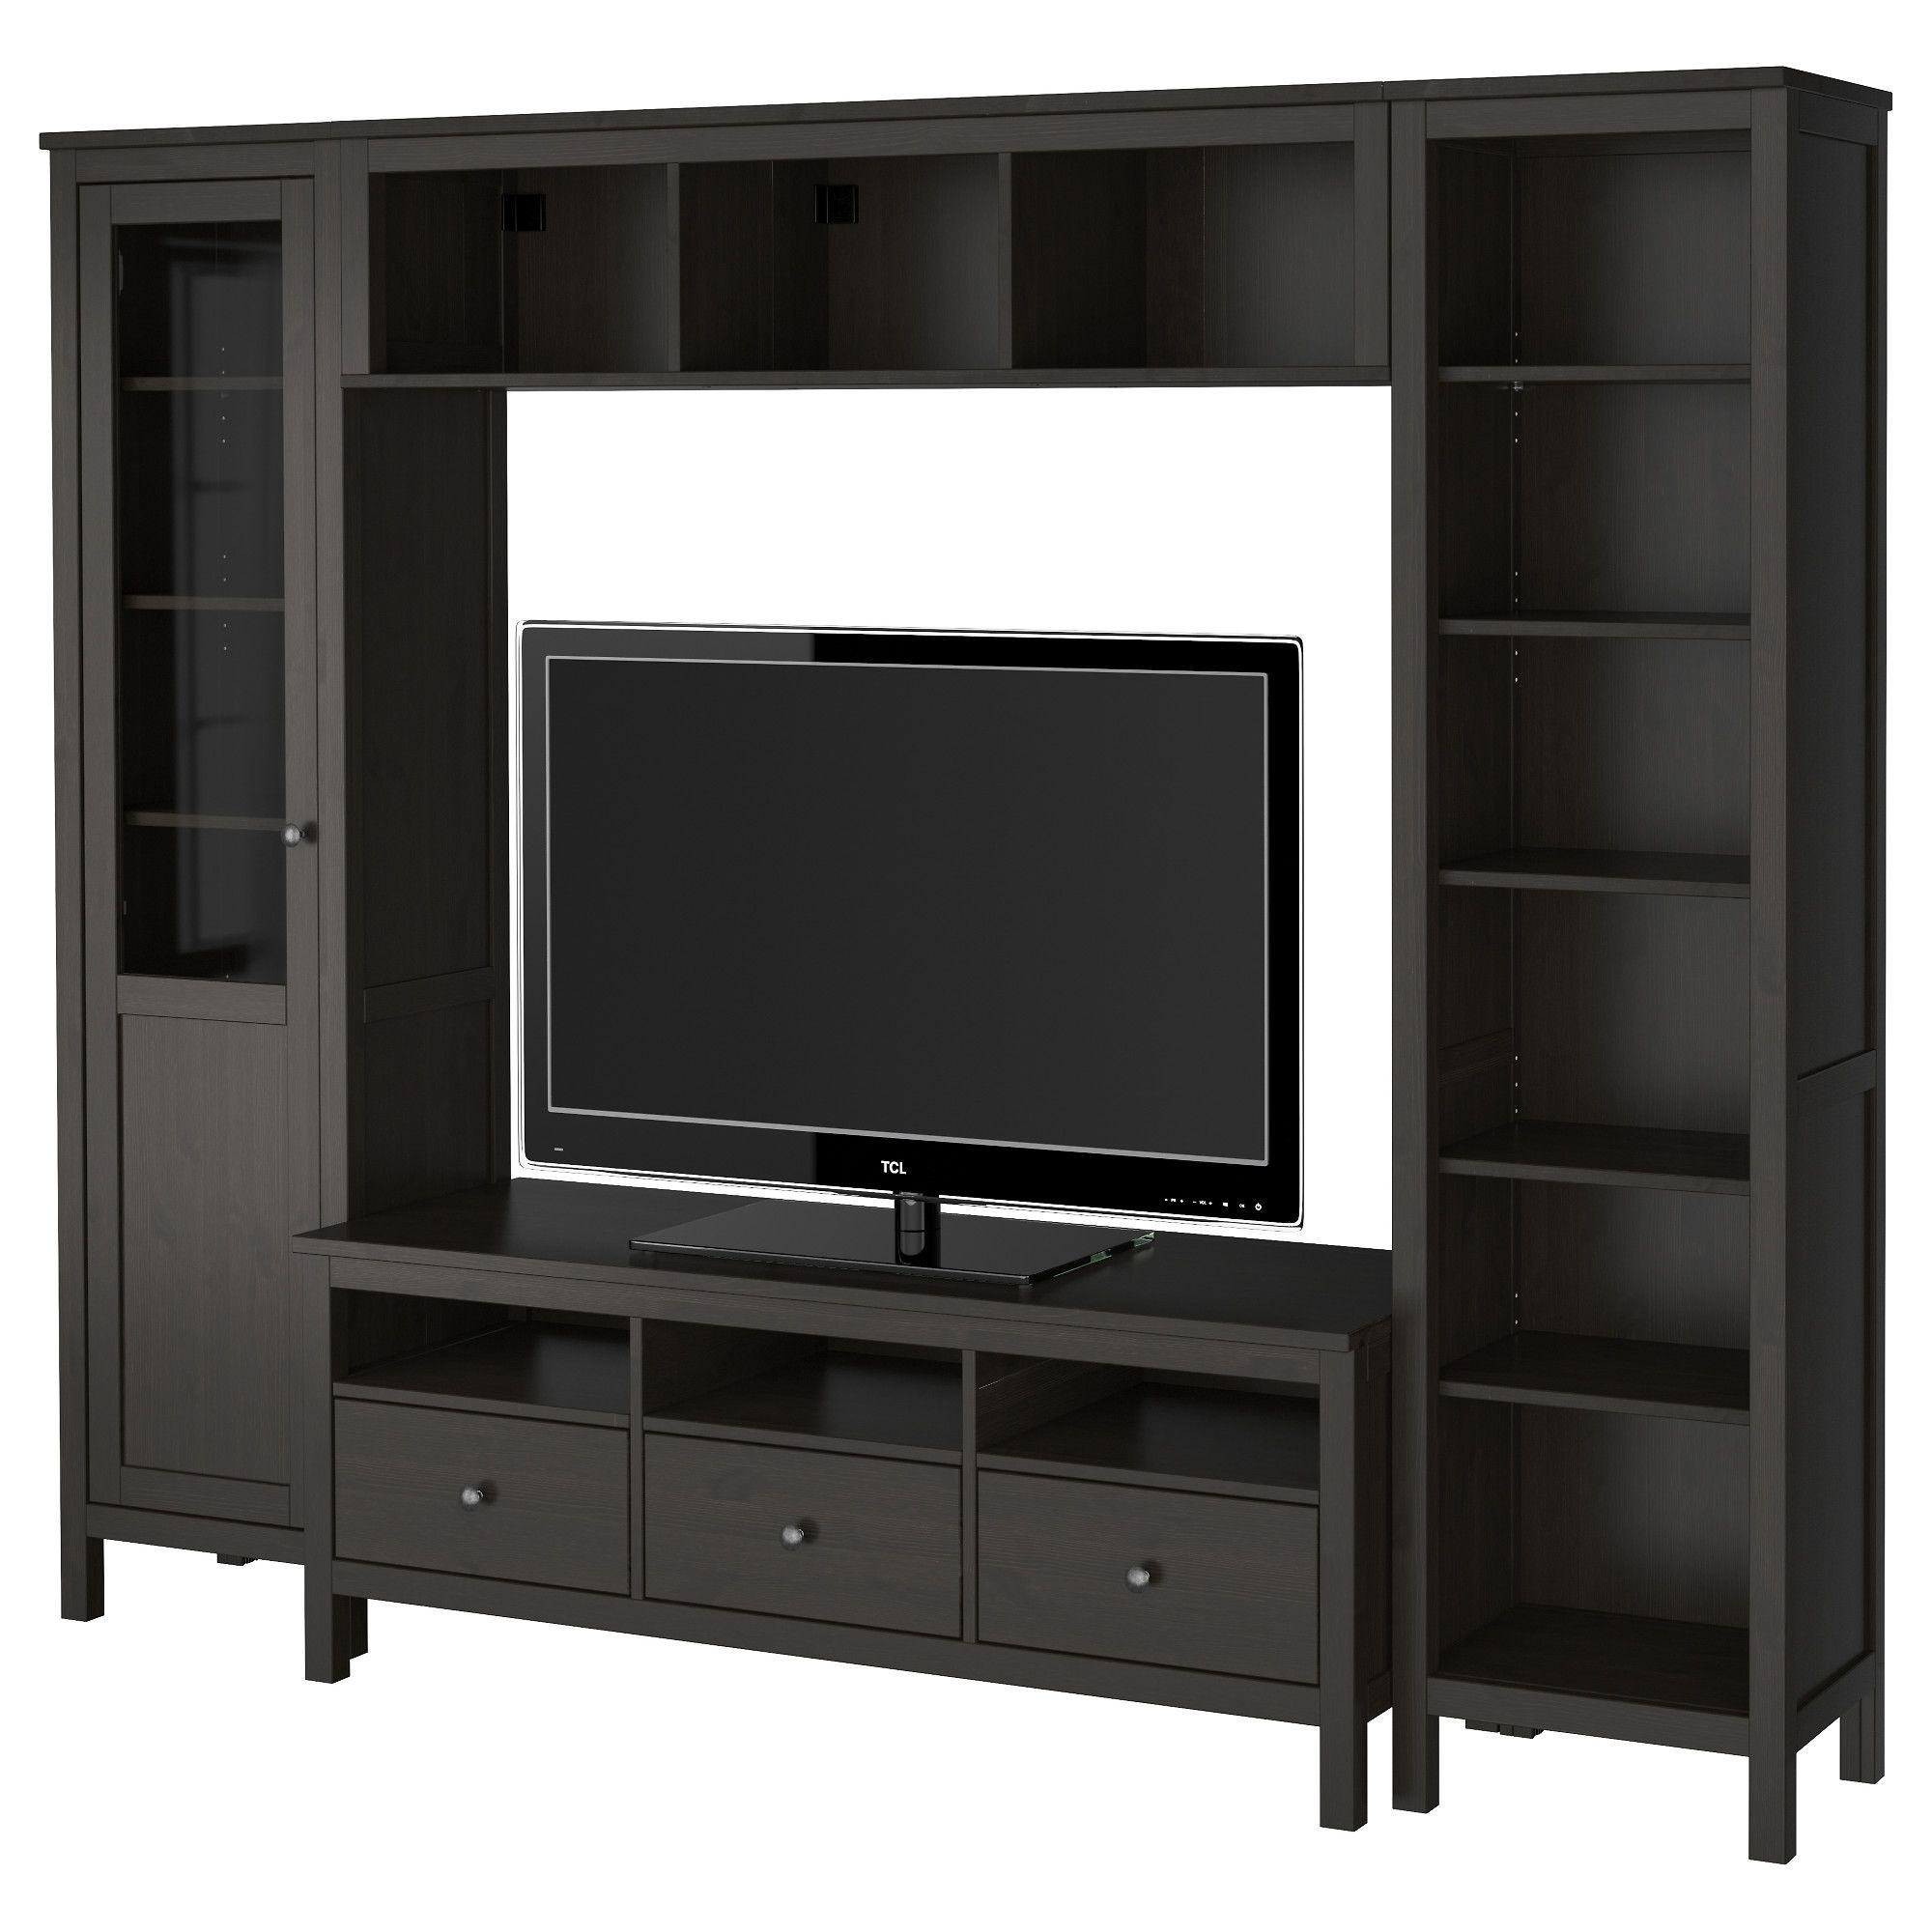 Bookcases Best Bookcase Tv Stand Set Ideas Tv Stand Bookcase With Tv Bookcase Combination (View 12 of 15)